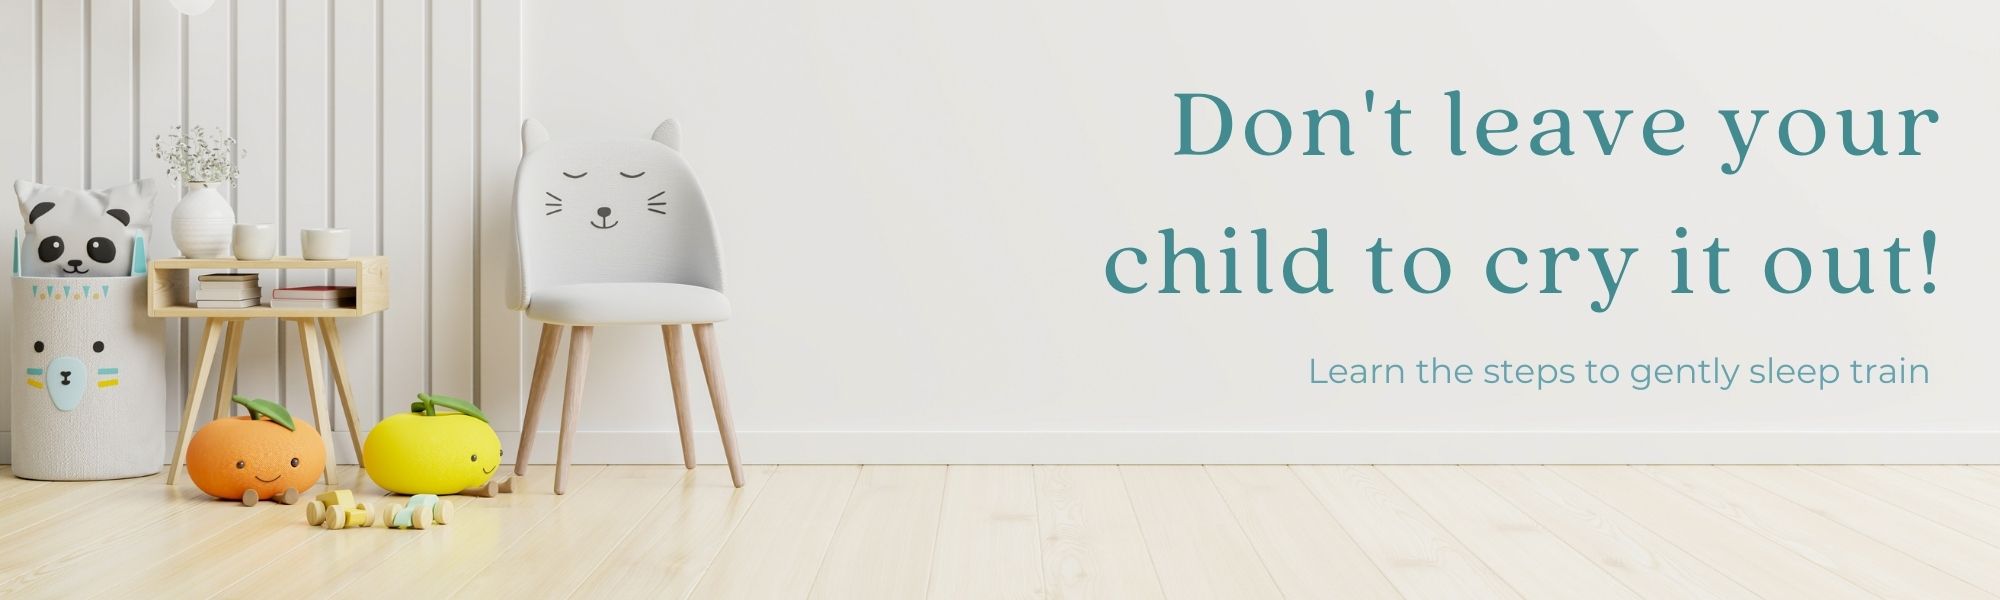 don't leave your child banner